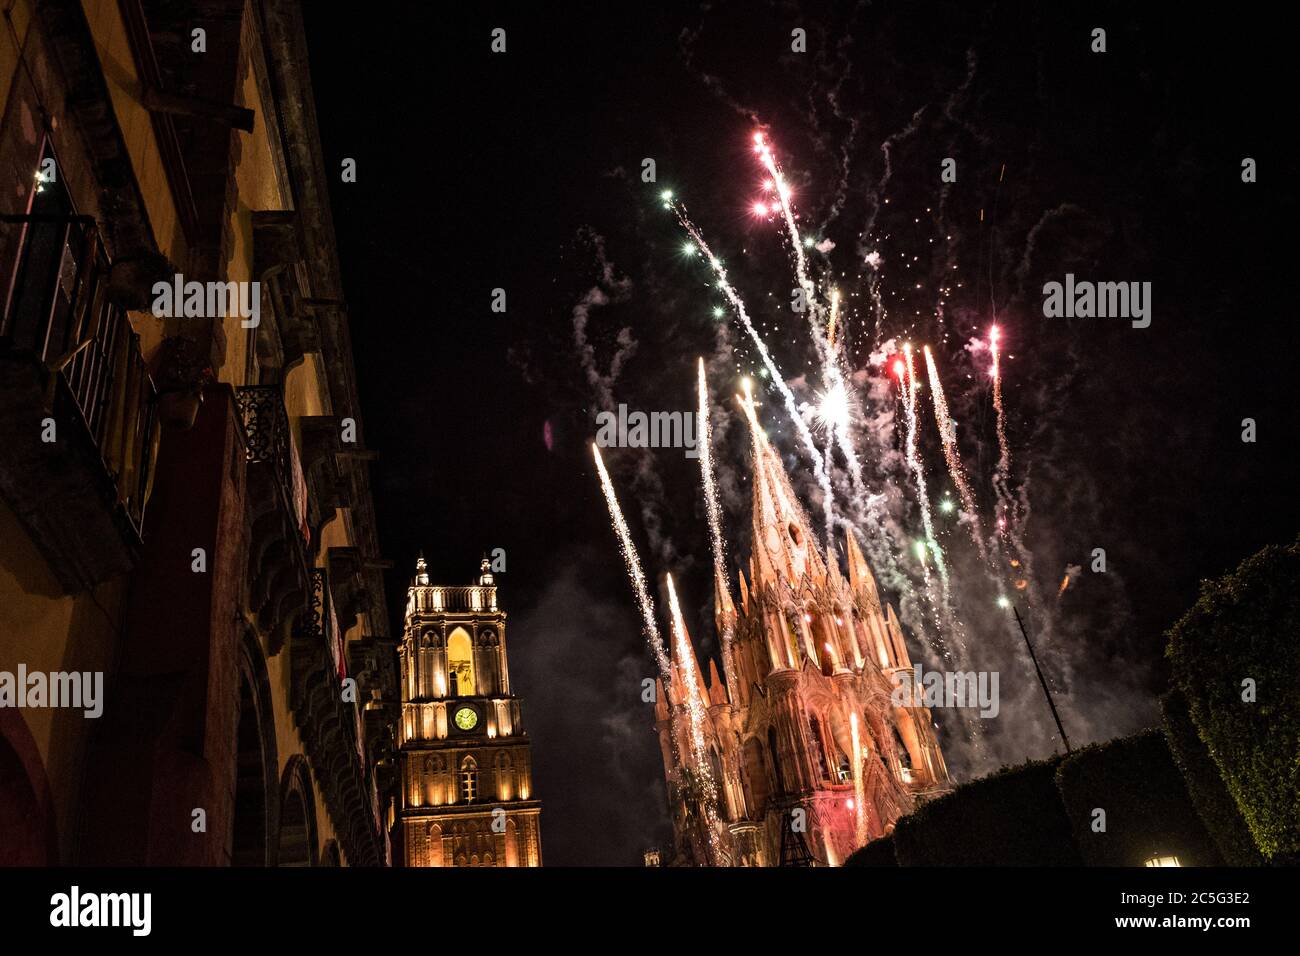 Fireworks explode over the Parroquia de San Miguel Arcangel and San Rafael Church in the Jardin Allende during the week long fiesta of the patron saint Saint Michael October 1, 2017 in San Miguel de Allende, Mexico. Stock Photo